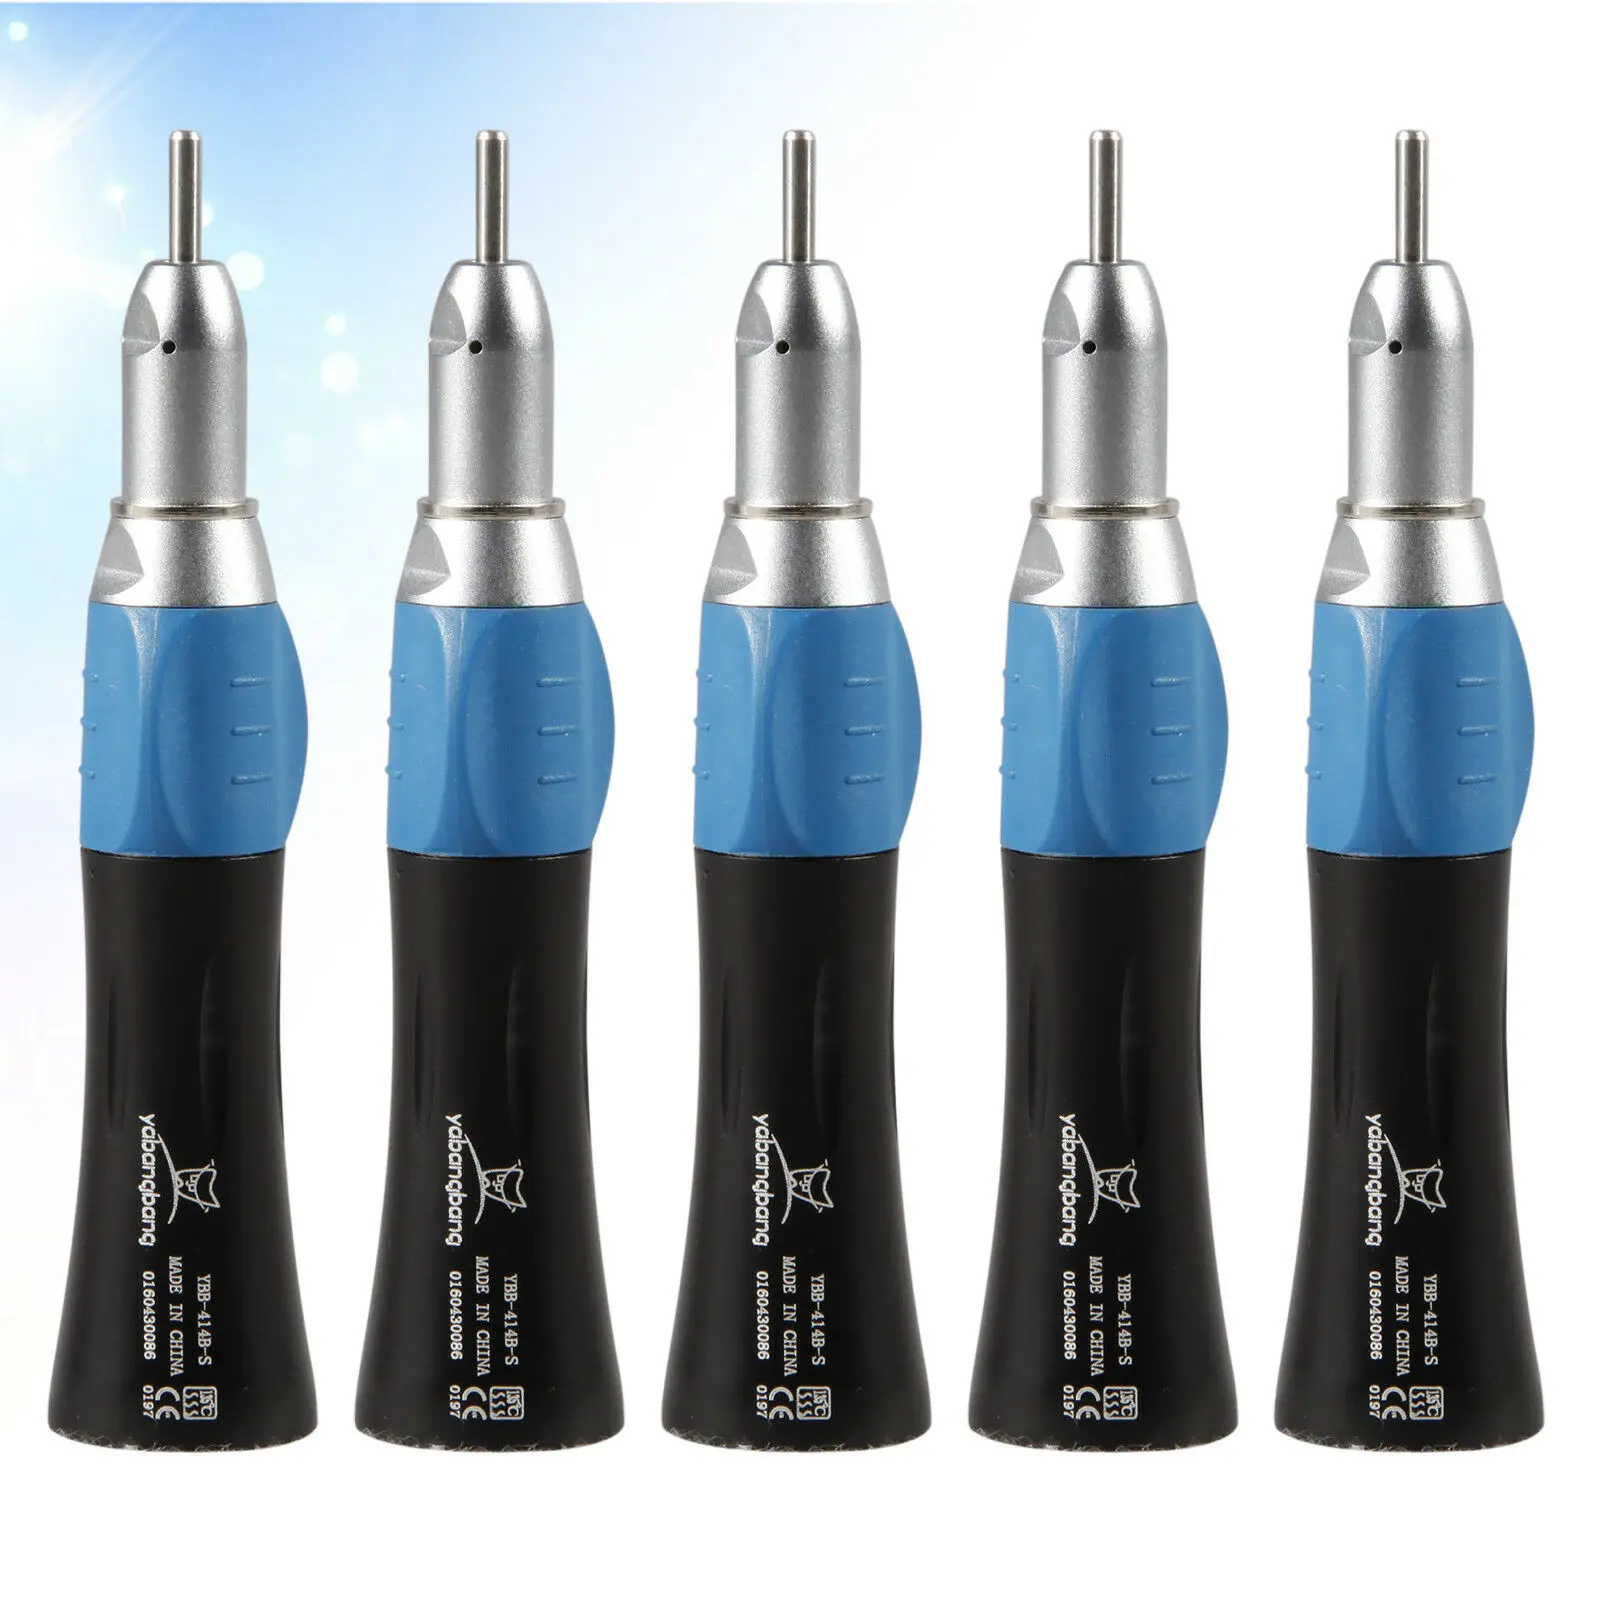 5PCS Dental NSK Slow Low Speed Straight Nose cone Handpiece Standard E-TYPE Connector 1:1 Ratio